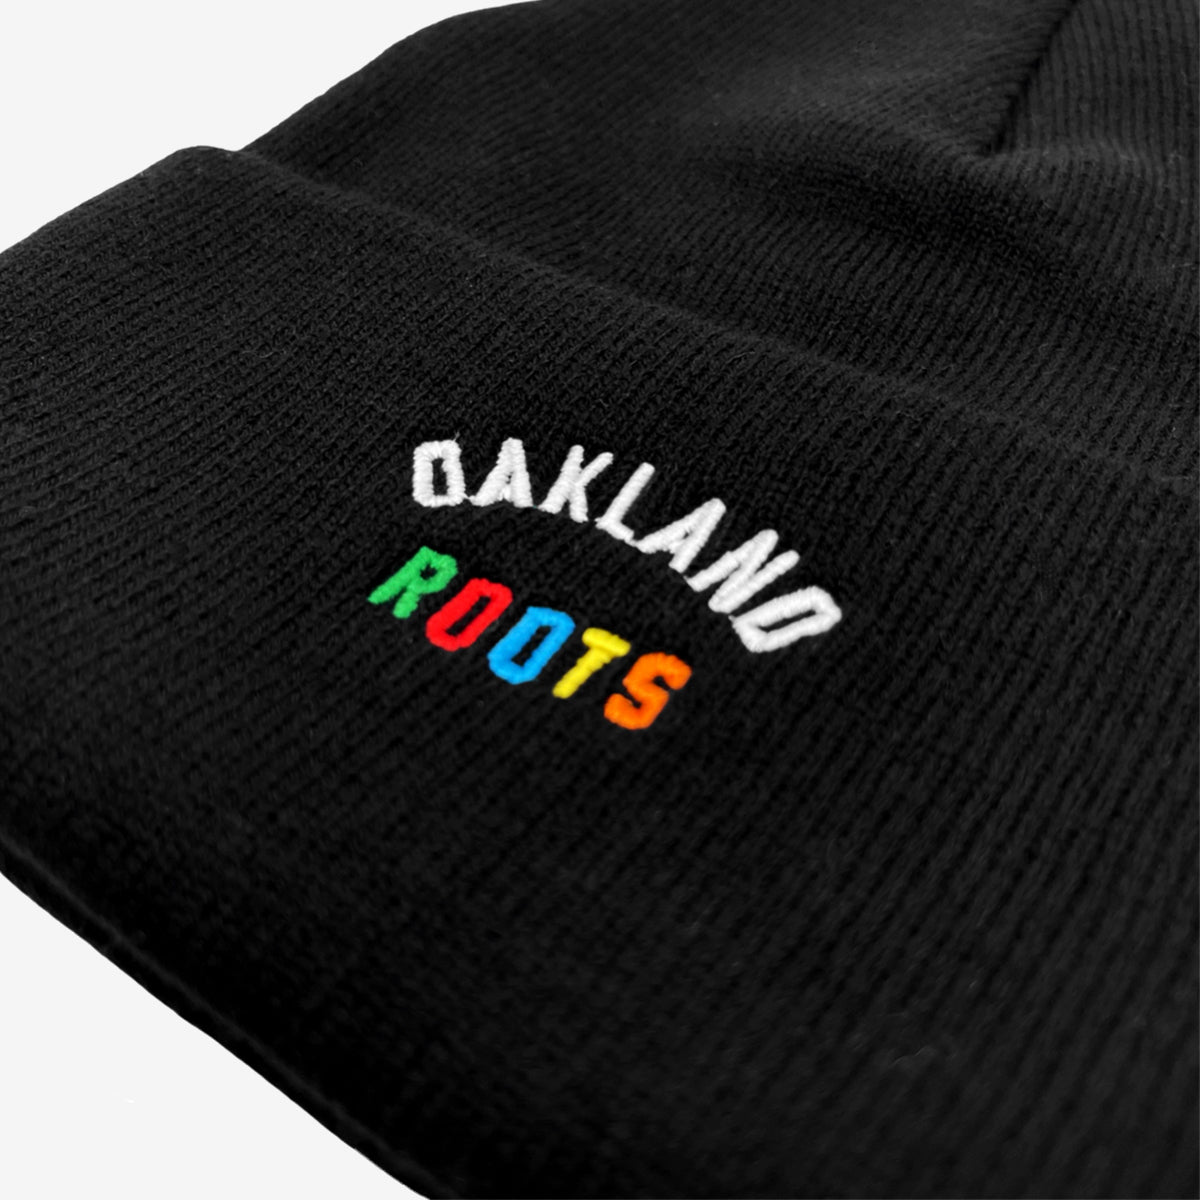 Close up of full-color Roots SC wordmark logo on a black cuffed beanie.